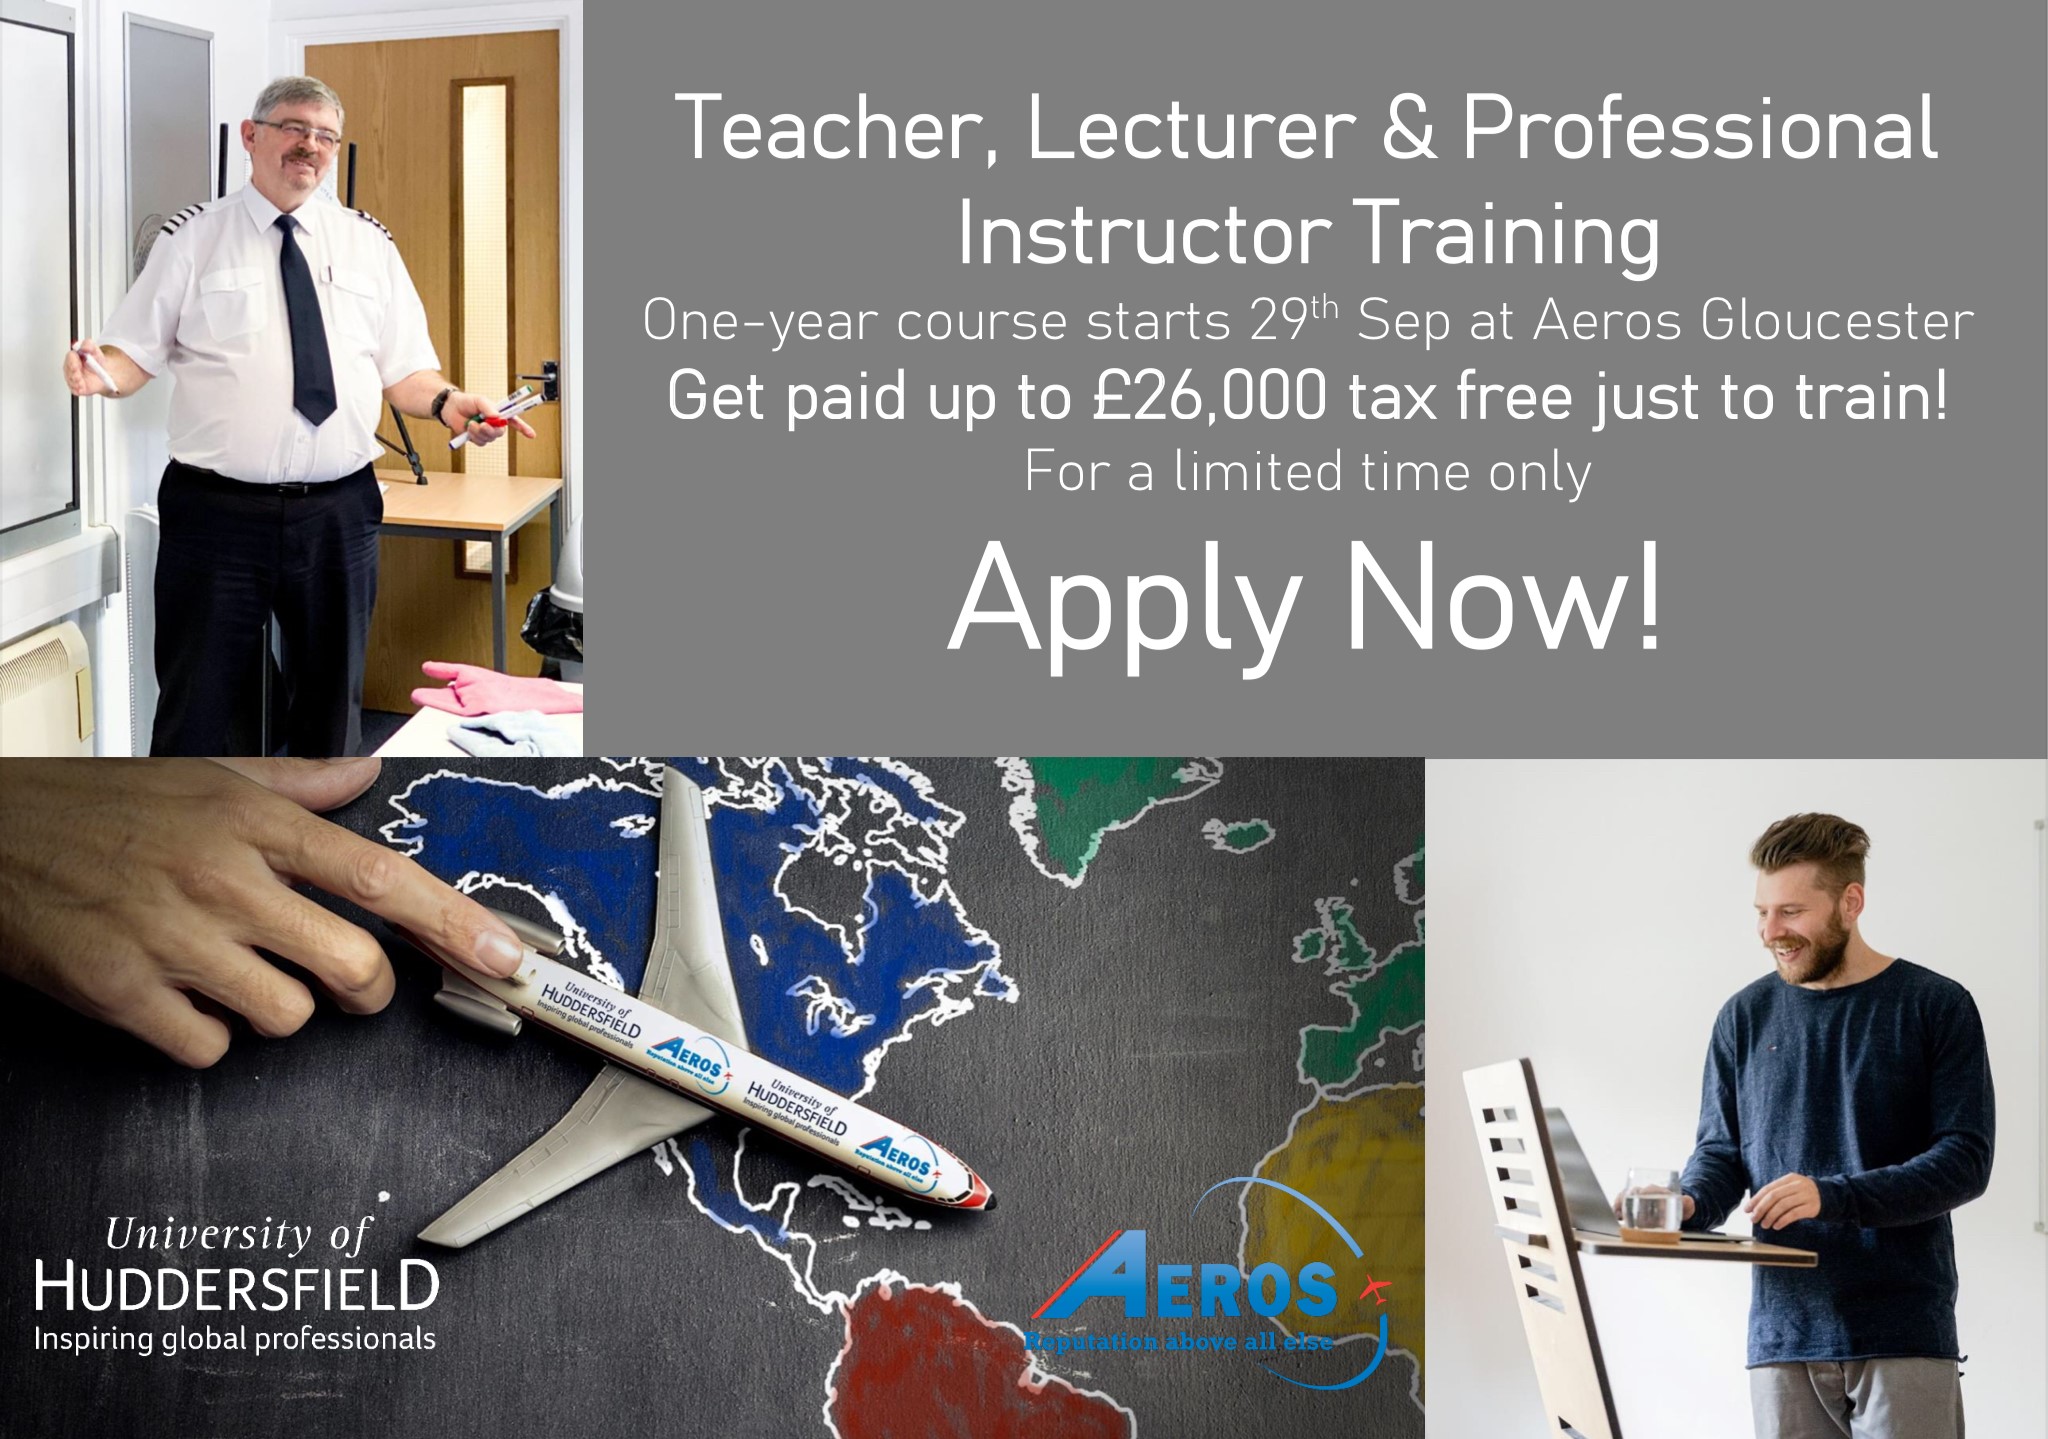 Aeros Group Announces Cutting-Edge Teacher Lecturer And Professional Instructor Training Partnership With The University Of Huddersfield